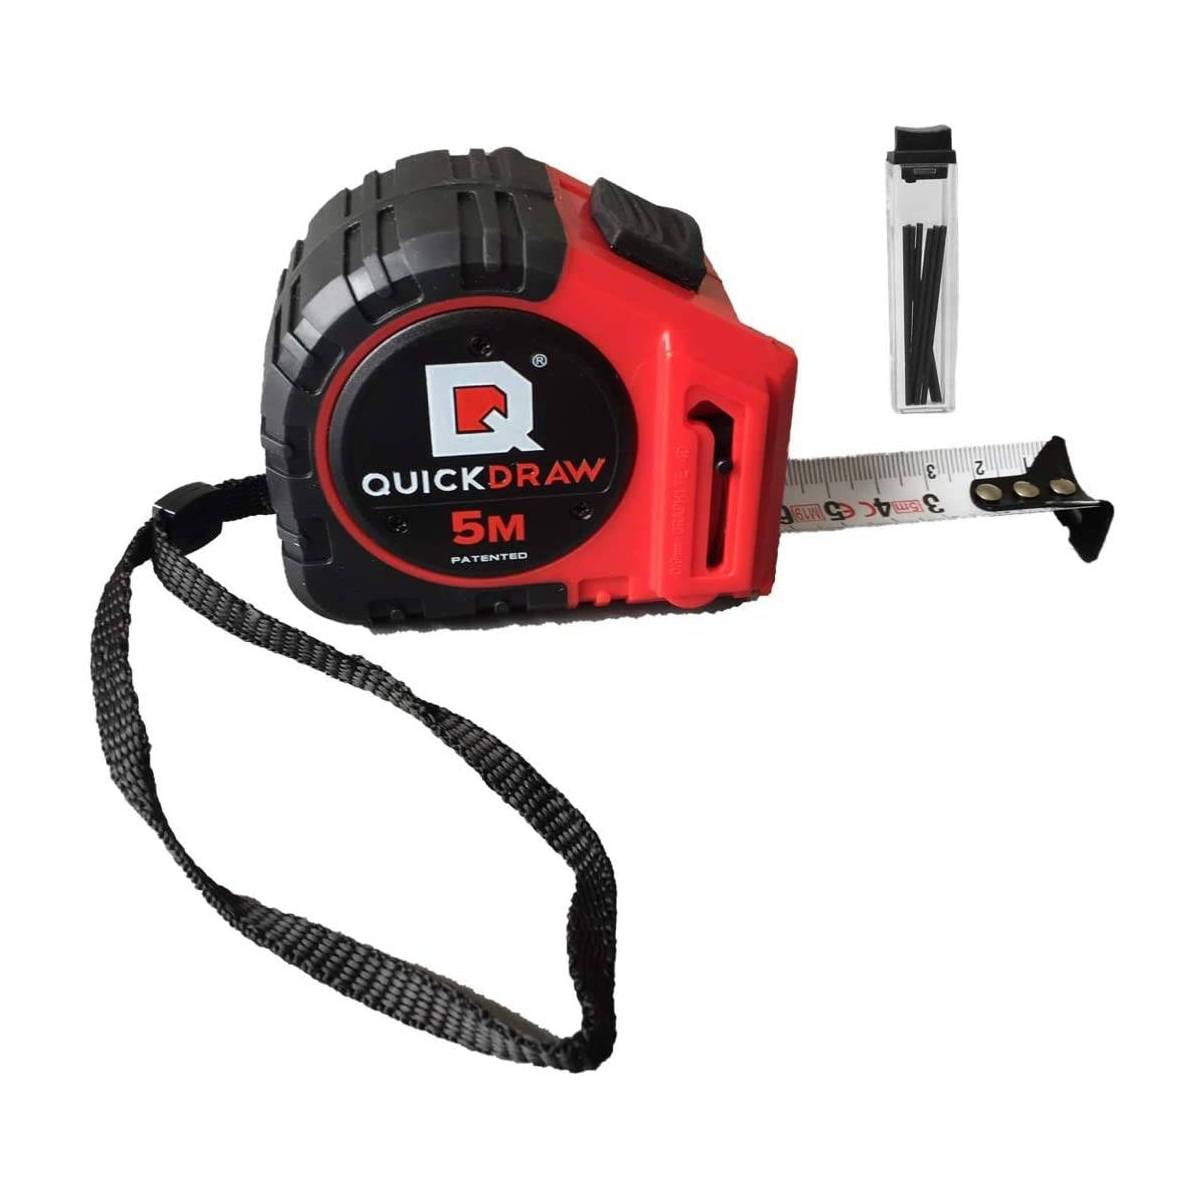 5m Tape Measure with QuickDraw Marking Function